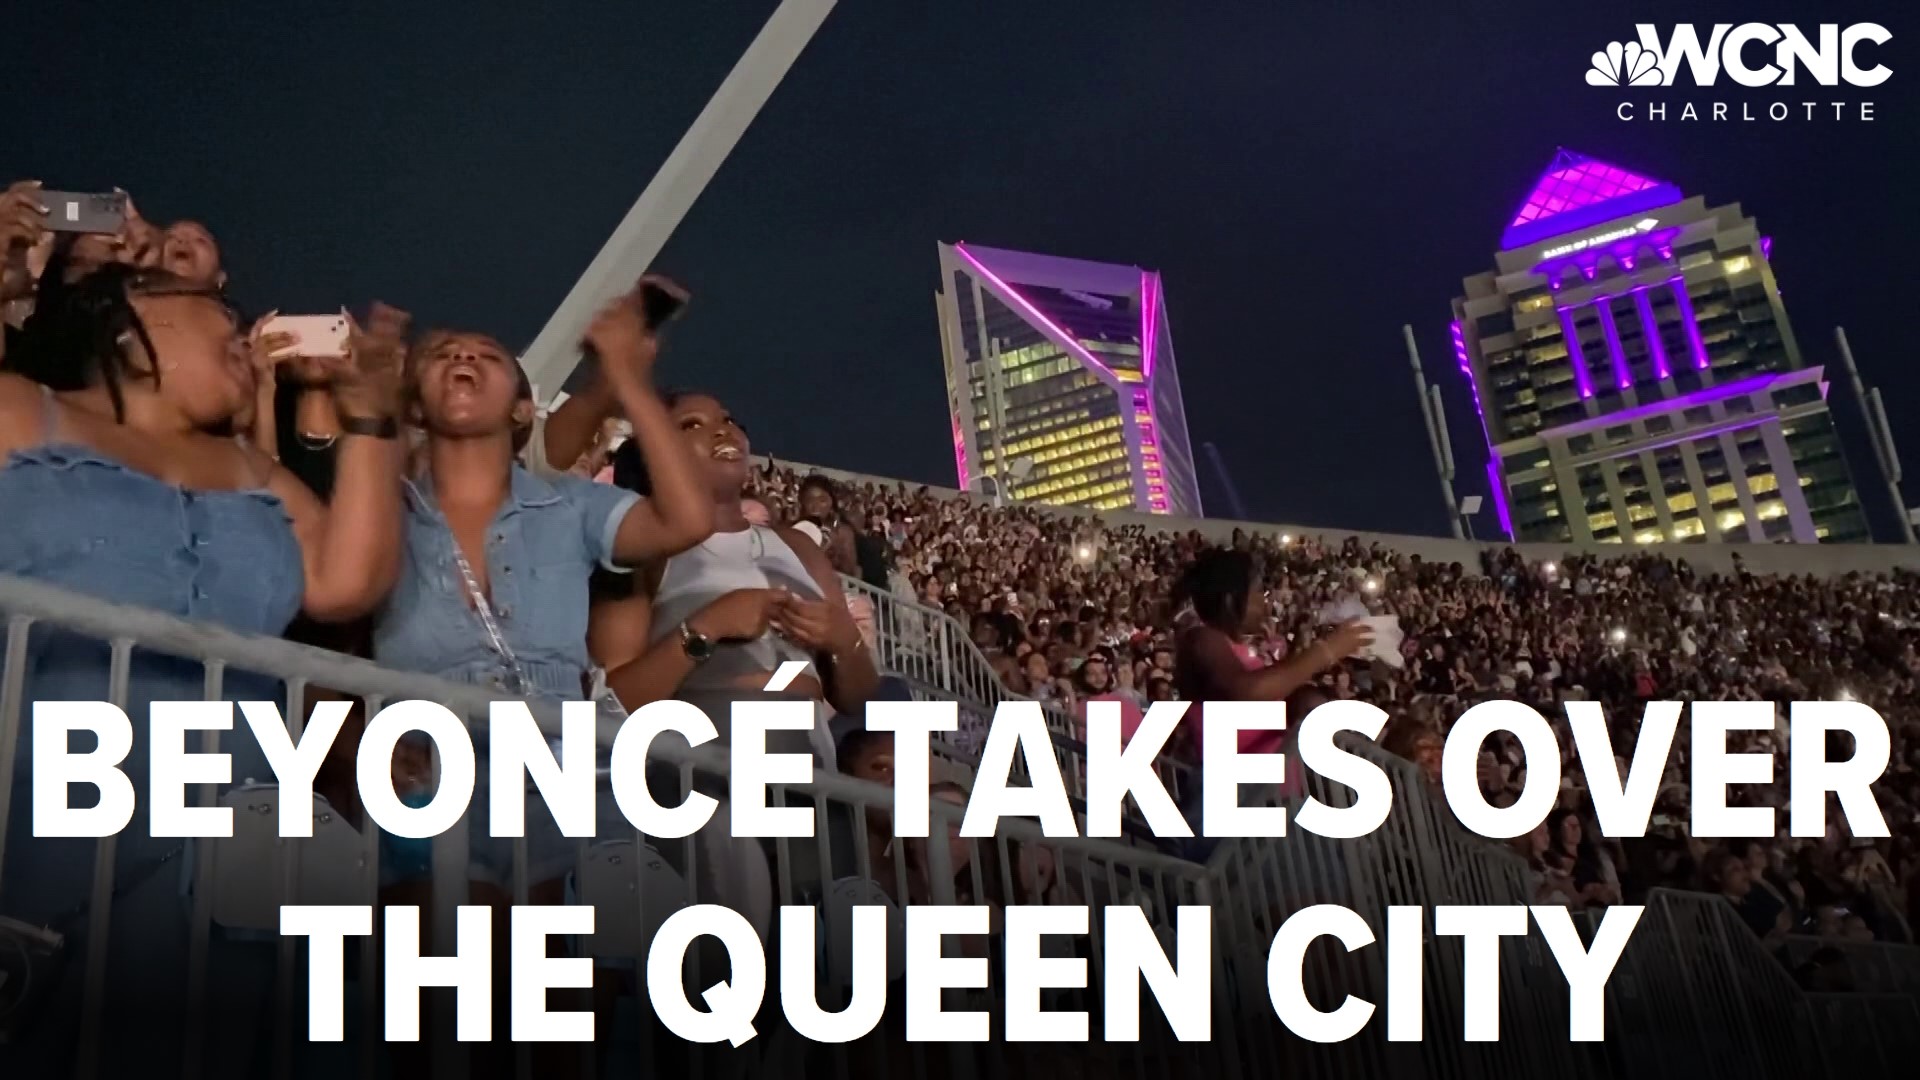 Thousands of peopled buzzed into Uptown Charlotte and Beyoncé turned Bank of America Stadium into a BeyHive.